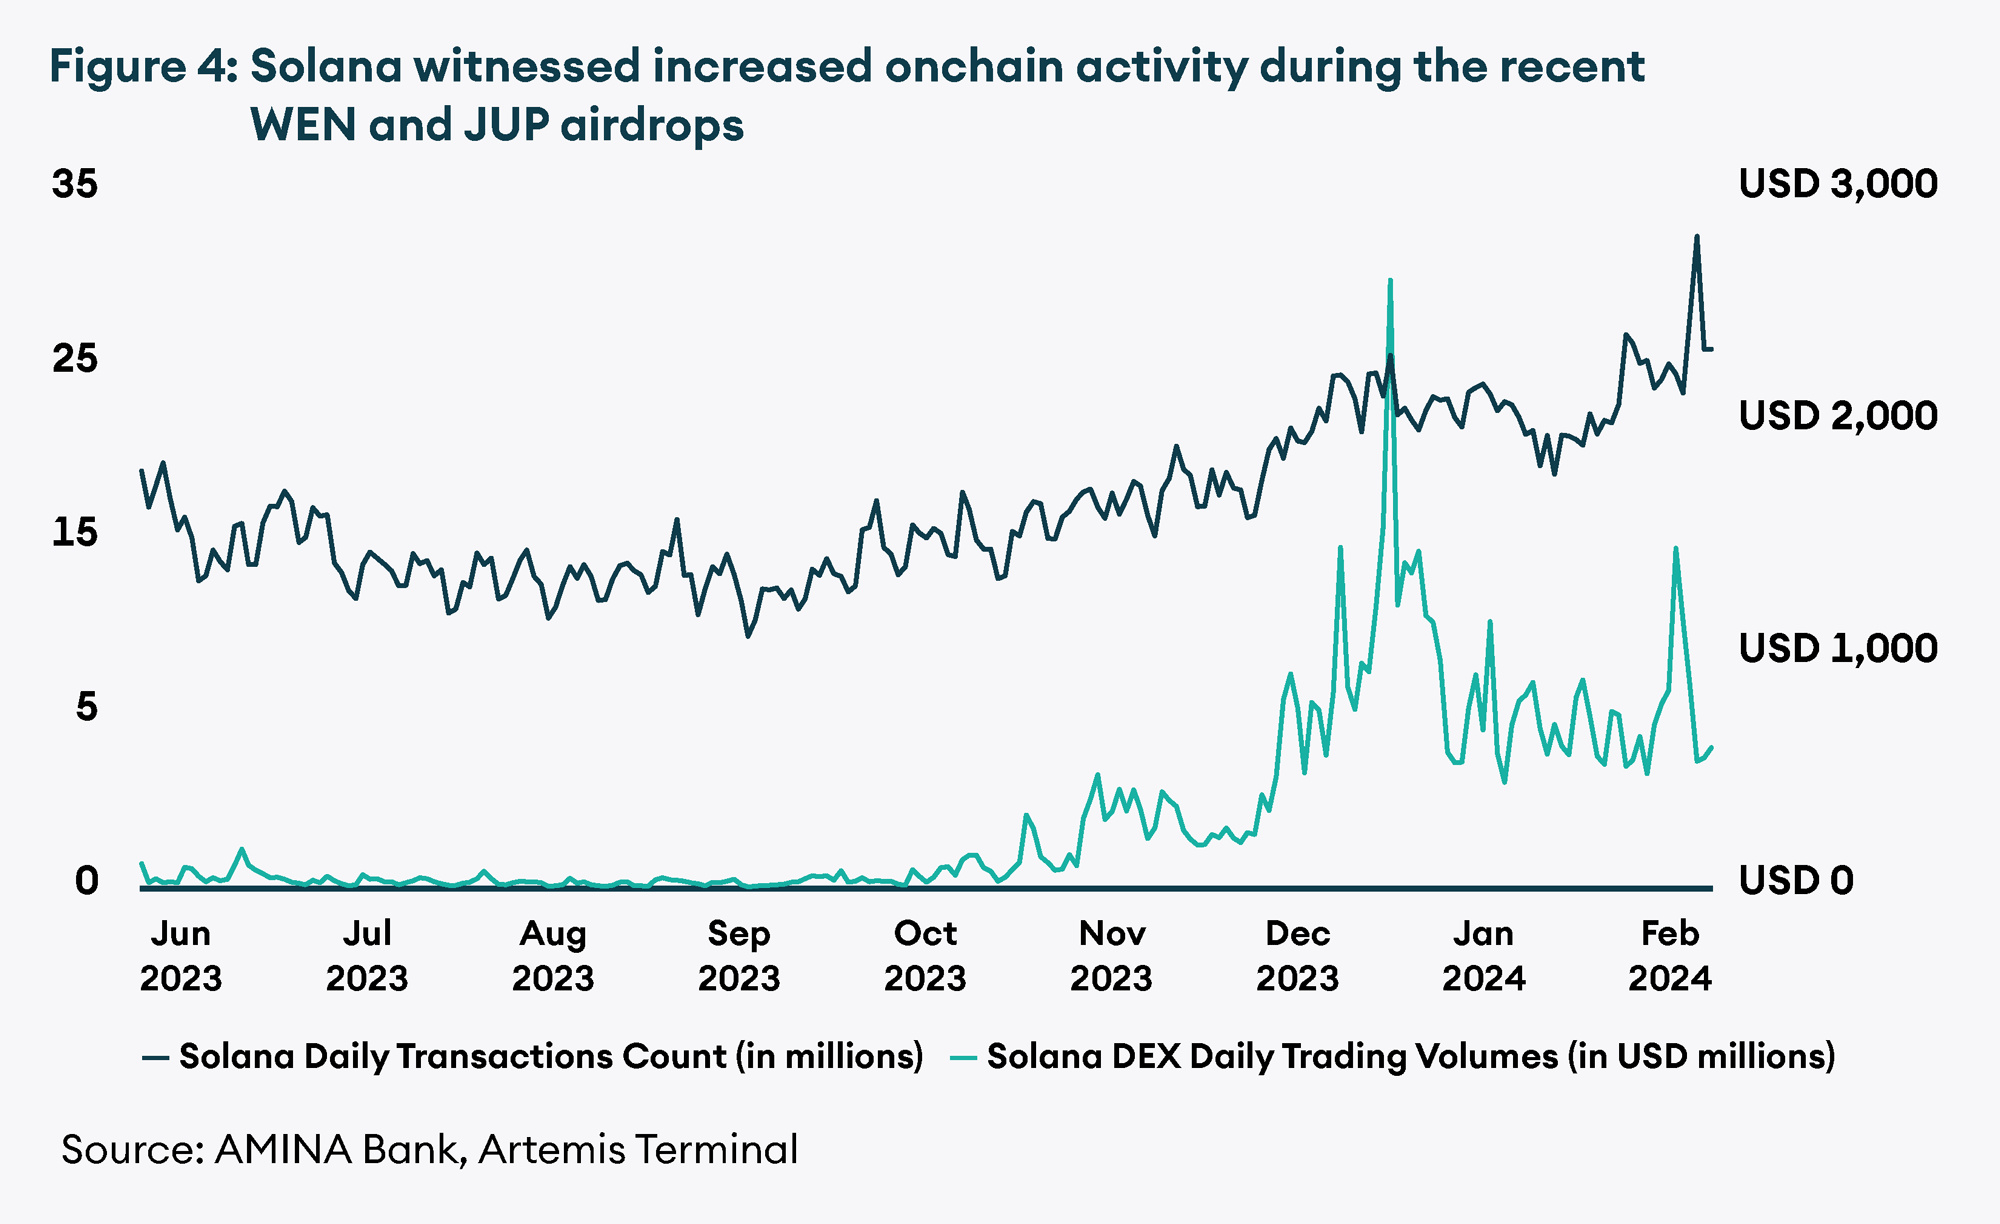 Solana witnessed increased onchain activity during the recent WEN and JUP airdrops